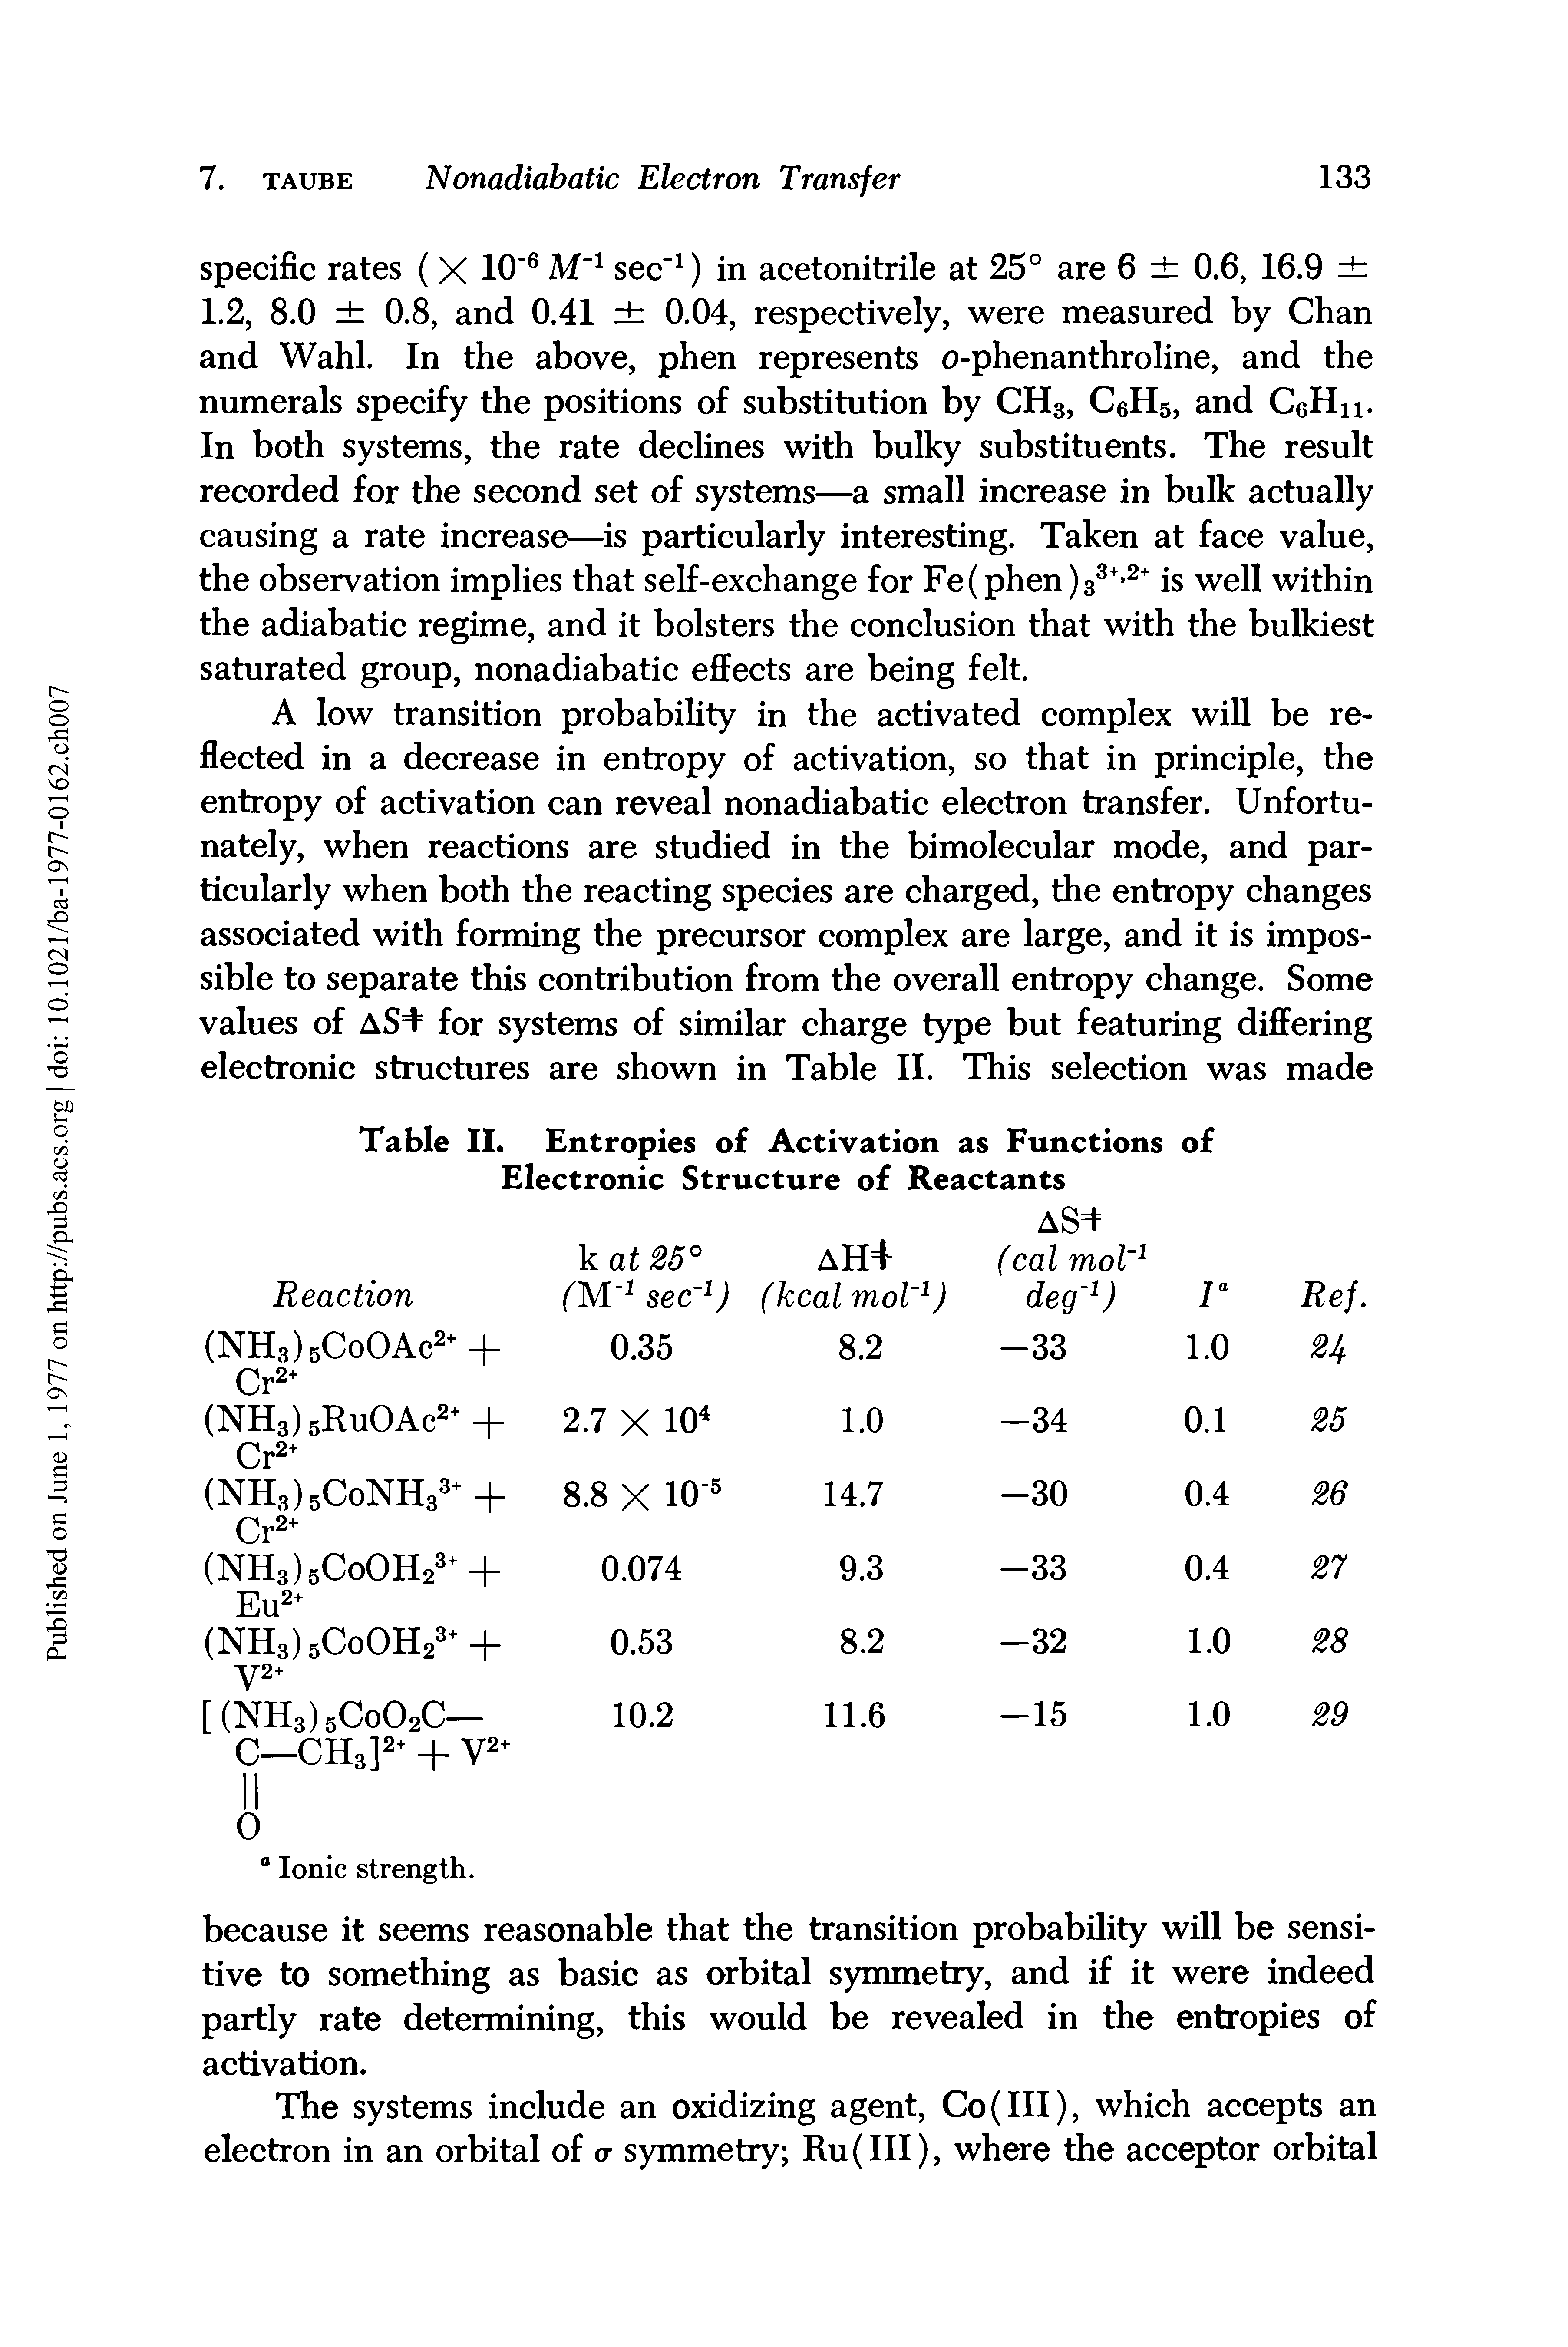 Table II. Entropies of Activation as Functions of Electronic Structure of Reactants...